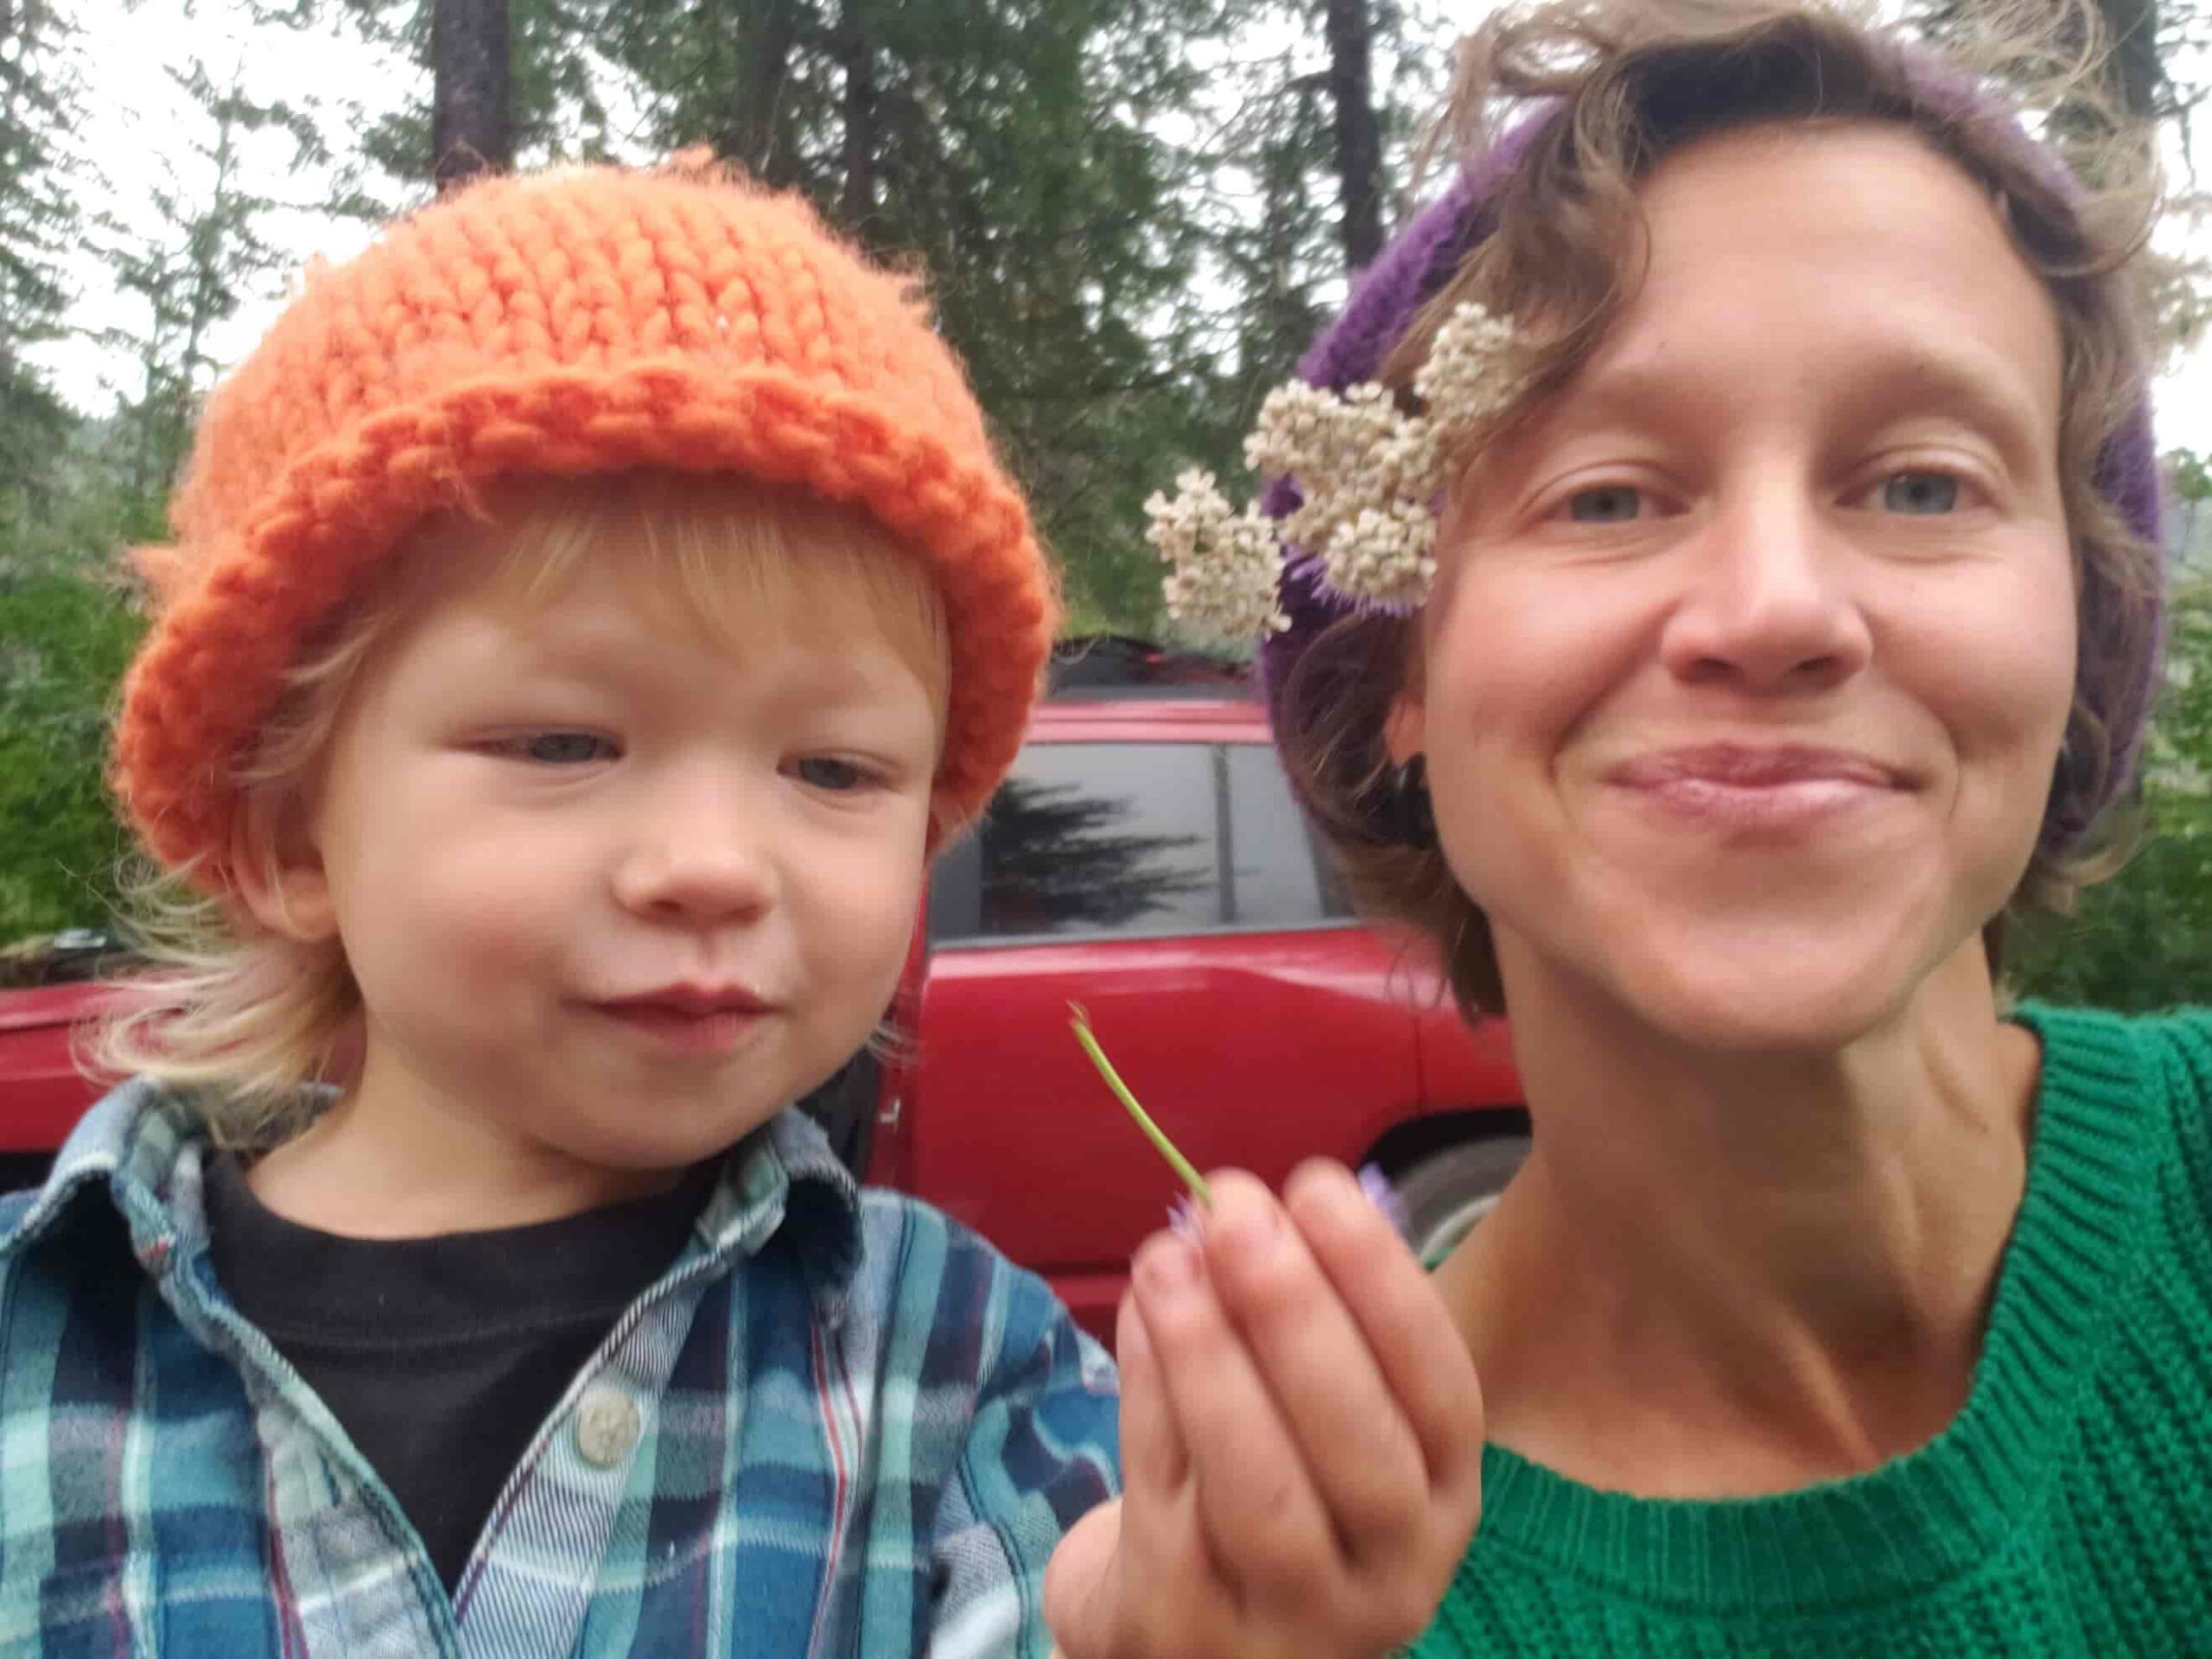 Dr. Sarah Sue Myers and her son Leo explore herbal remedies in the garden.